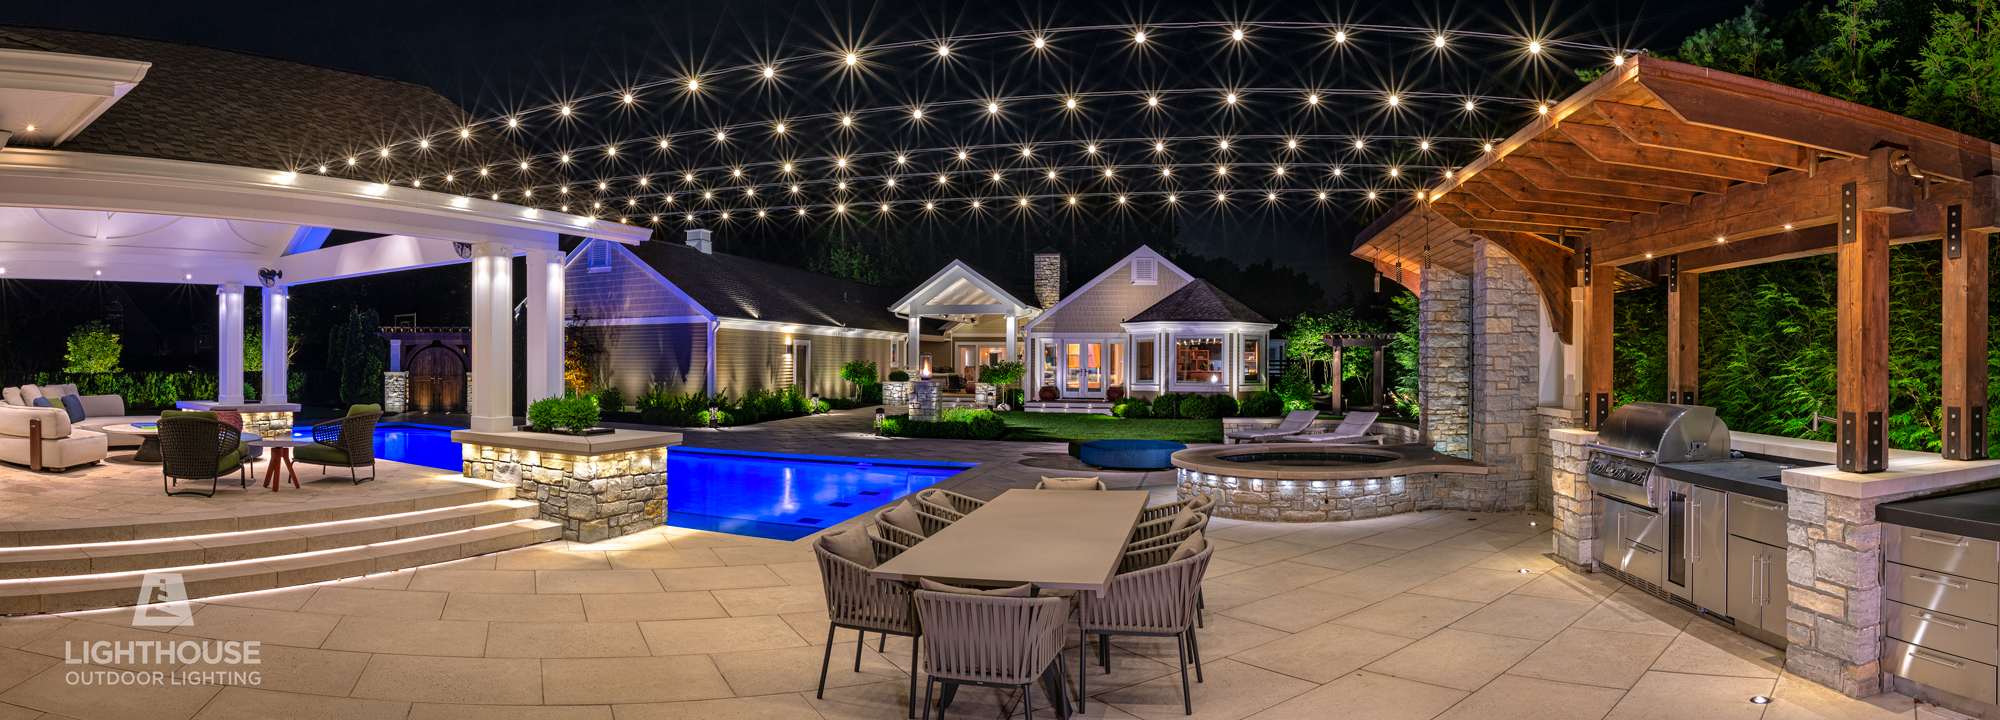 Patio String Lighting in Huber Heights , OH